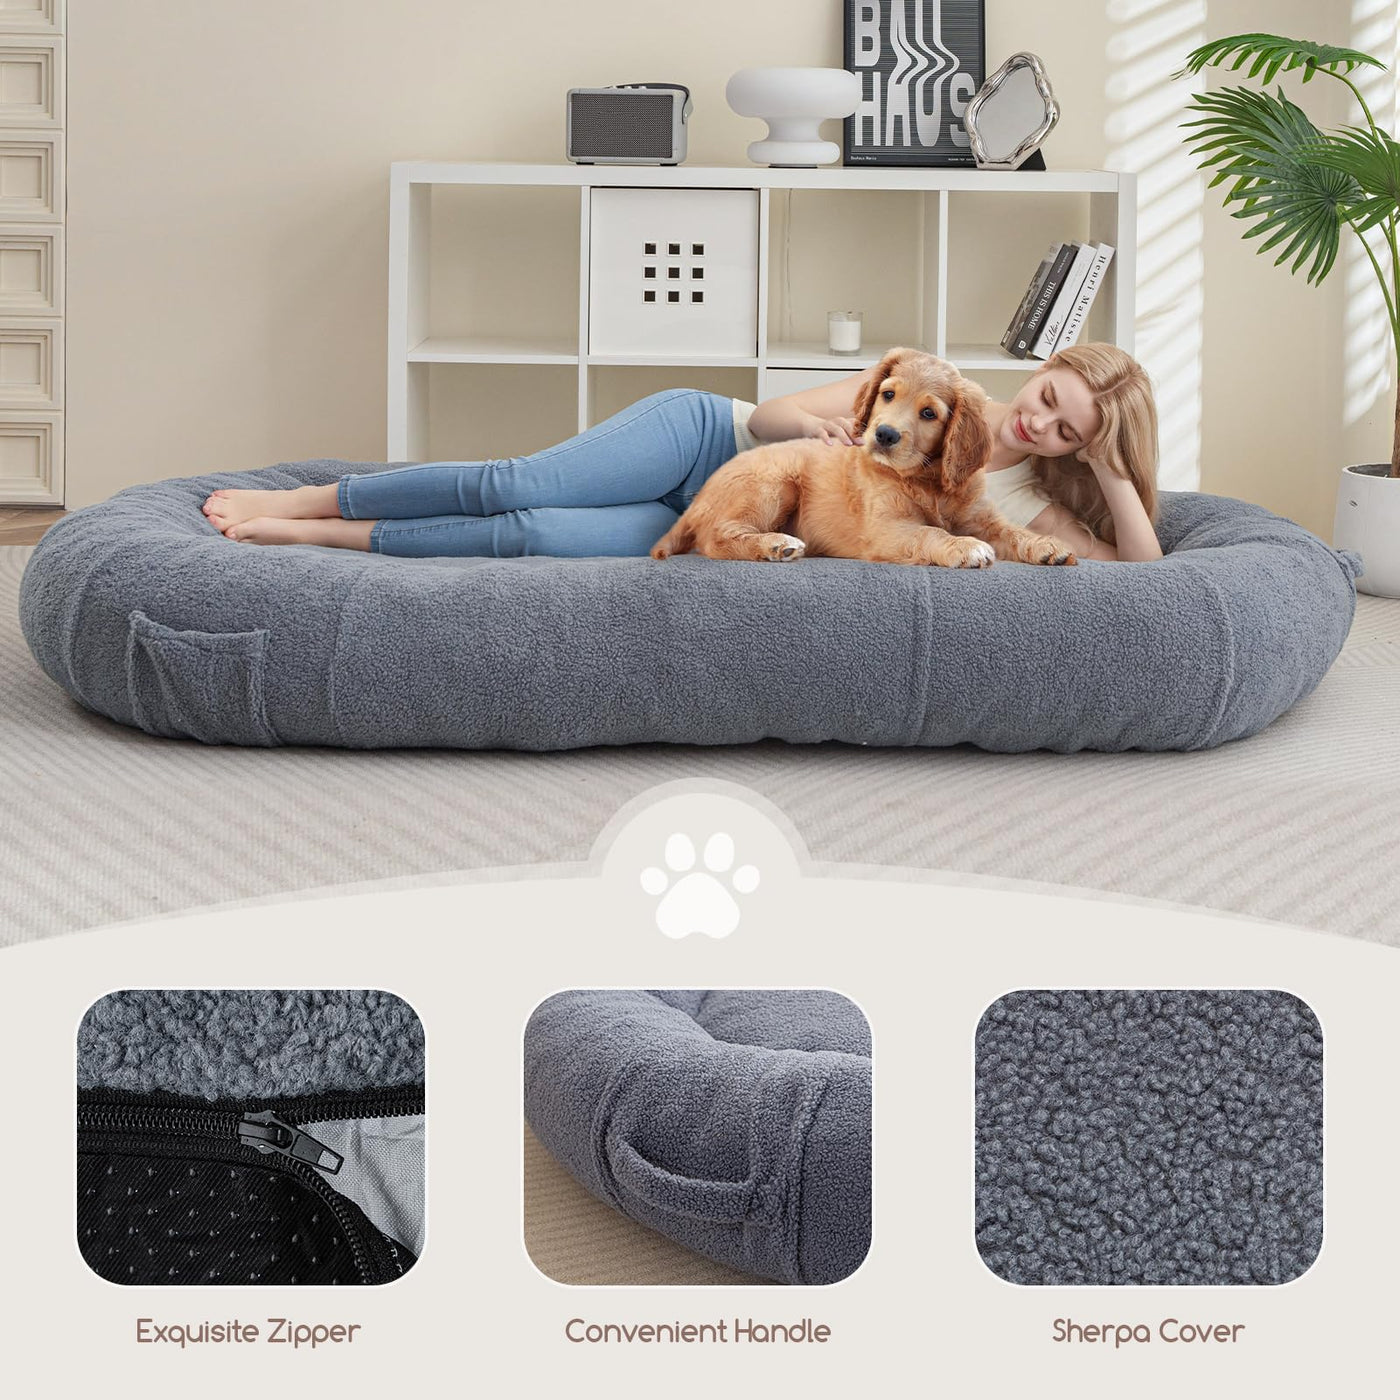 MAXYOYO Giant Dog Bed for Human, Sherpa Dog Bed for Humans Size Fits You and Pets, Smoky Blue